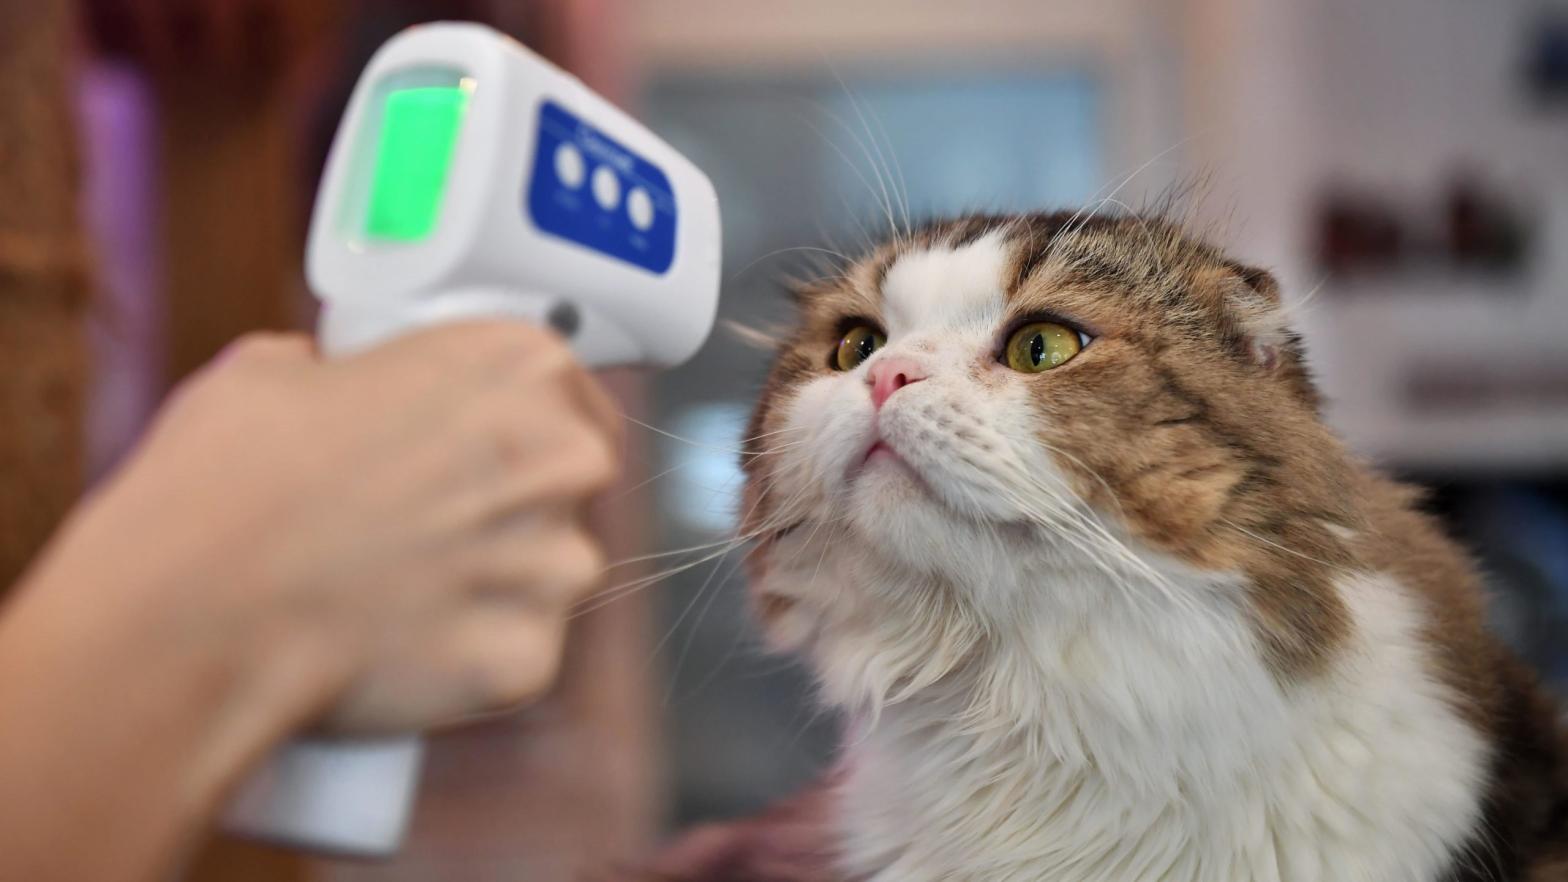 A cat at the Caturday Cat Cafe in Bangkok, Thailand having its temperature taken this past May. (Image: Lillian Suwanrumpha, Getty Images)